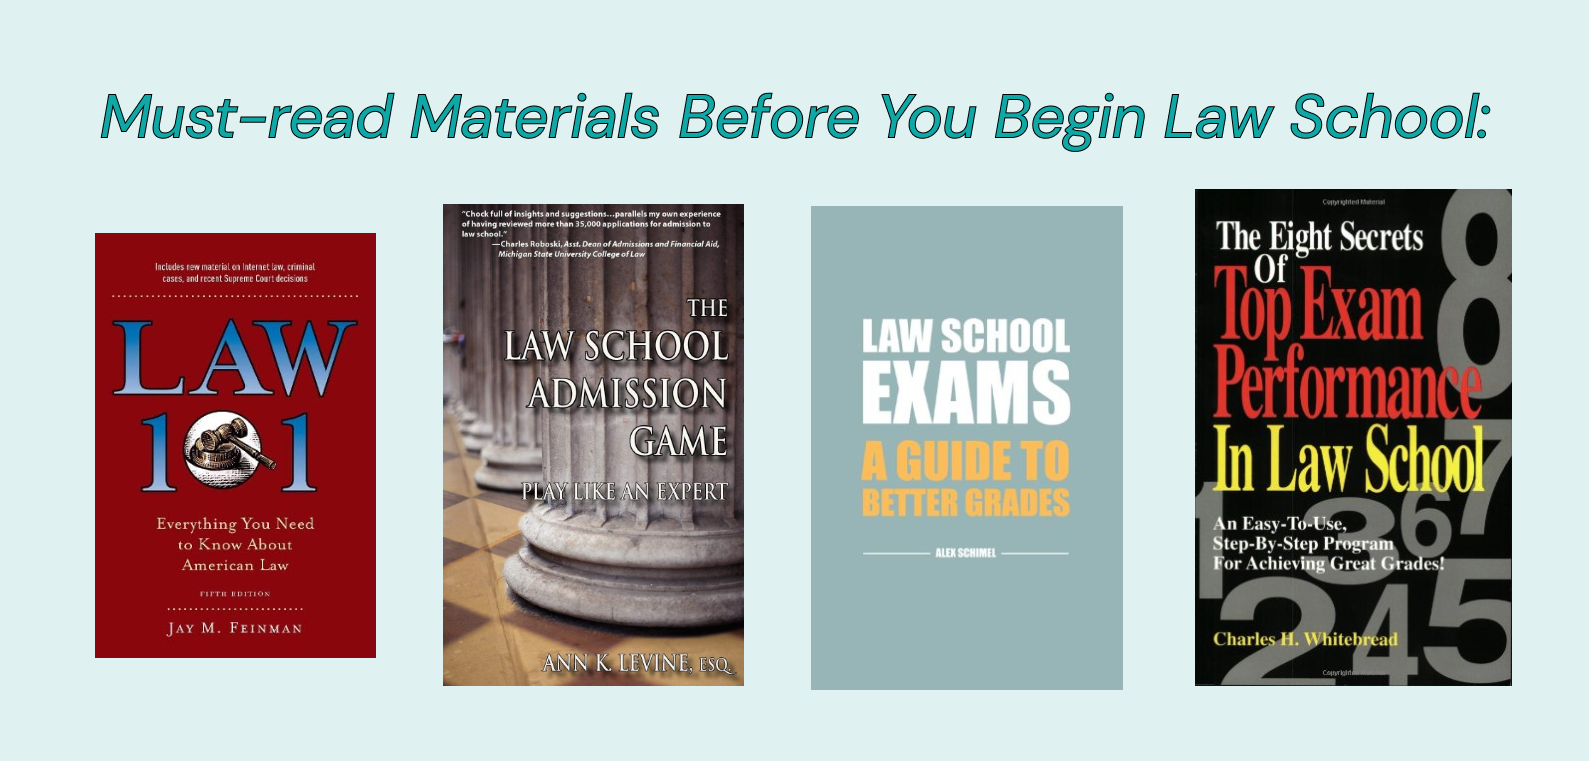 Must-read Materials Before You Begin Law School